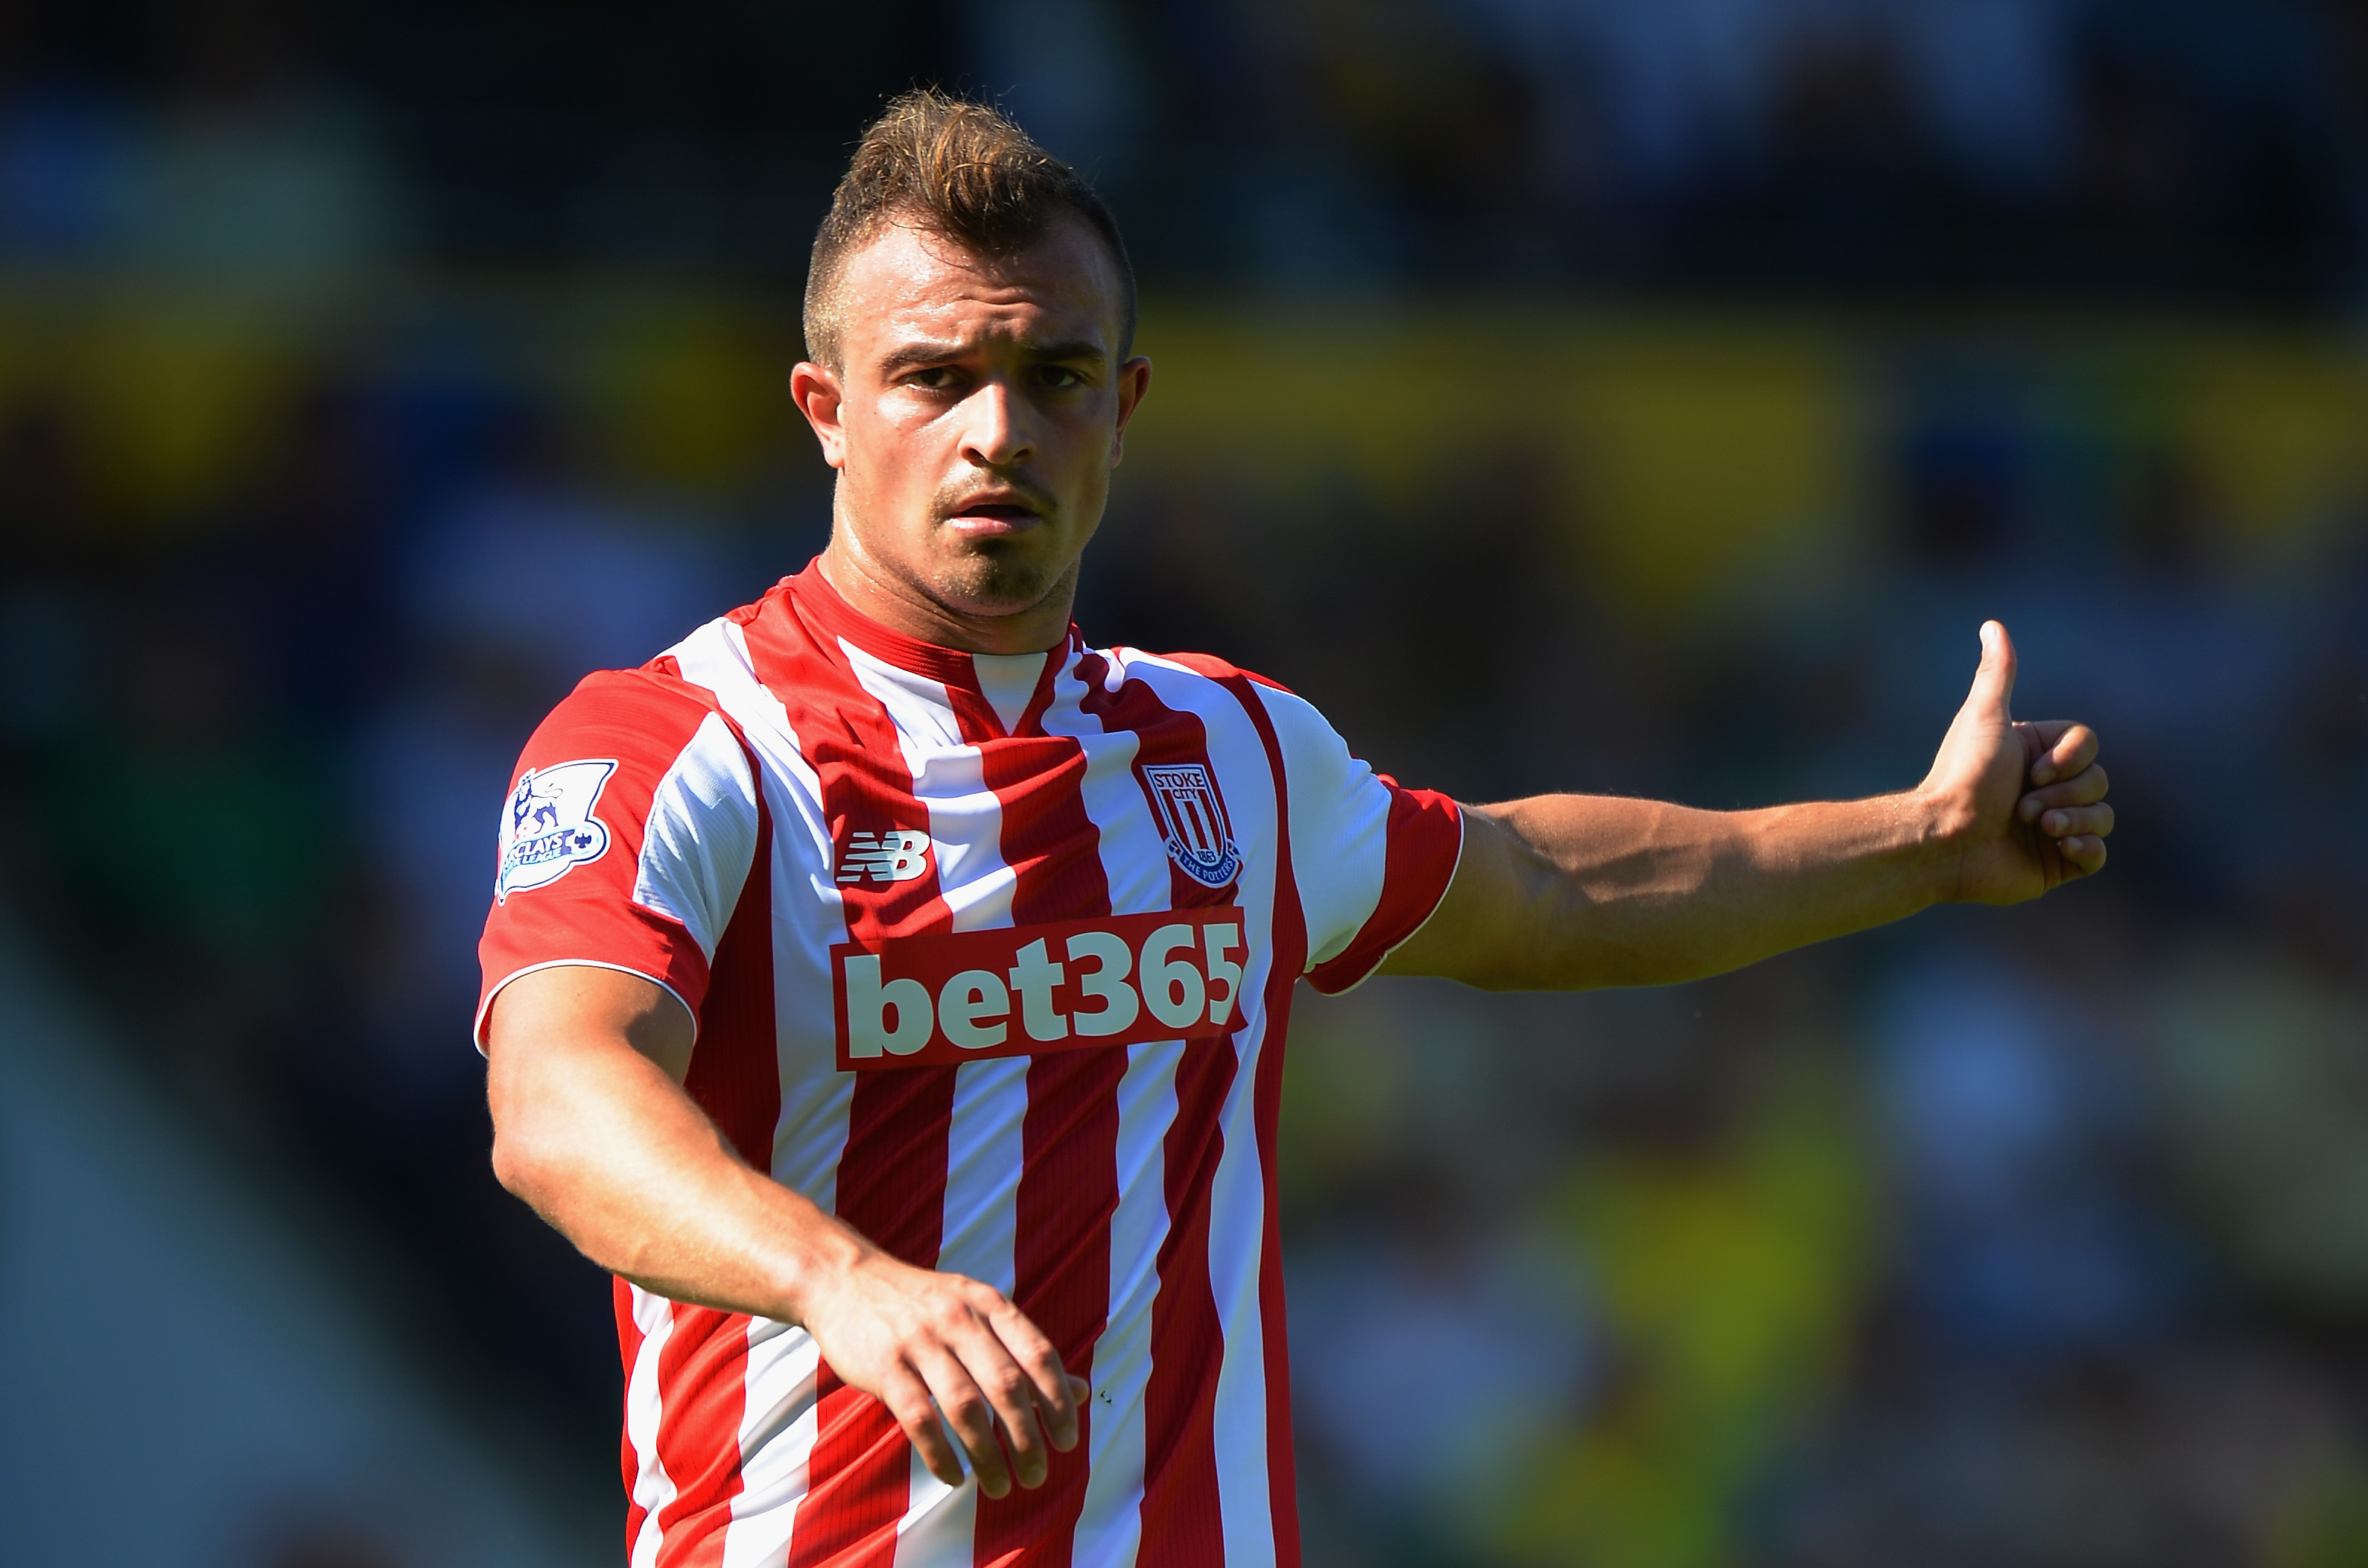 NORWICH, ENGLAND - AUGUST 22: Xherdan Shaqiri of Stoke City in action during the Barclays Premier League match between Norwich City and Stoke City at Carrow Road on August 22, 2015 in Norwich, England. (Photo by Tony Marshall/Getty Images)